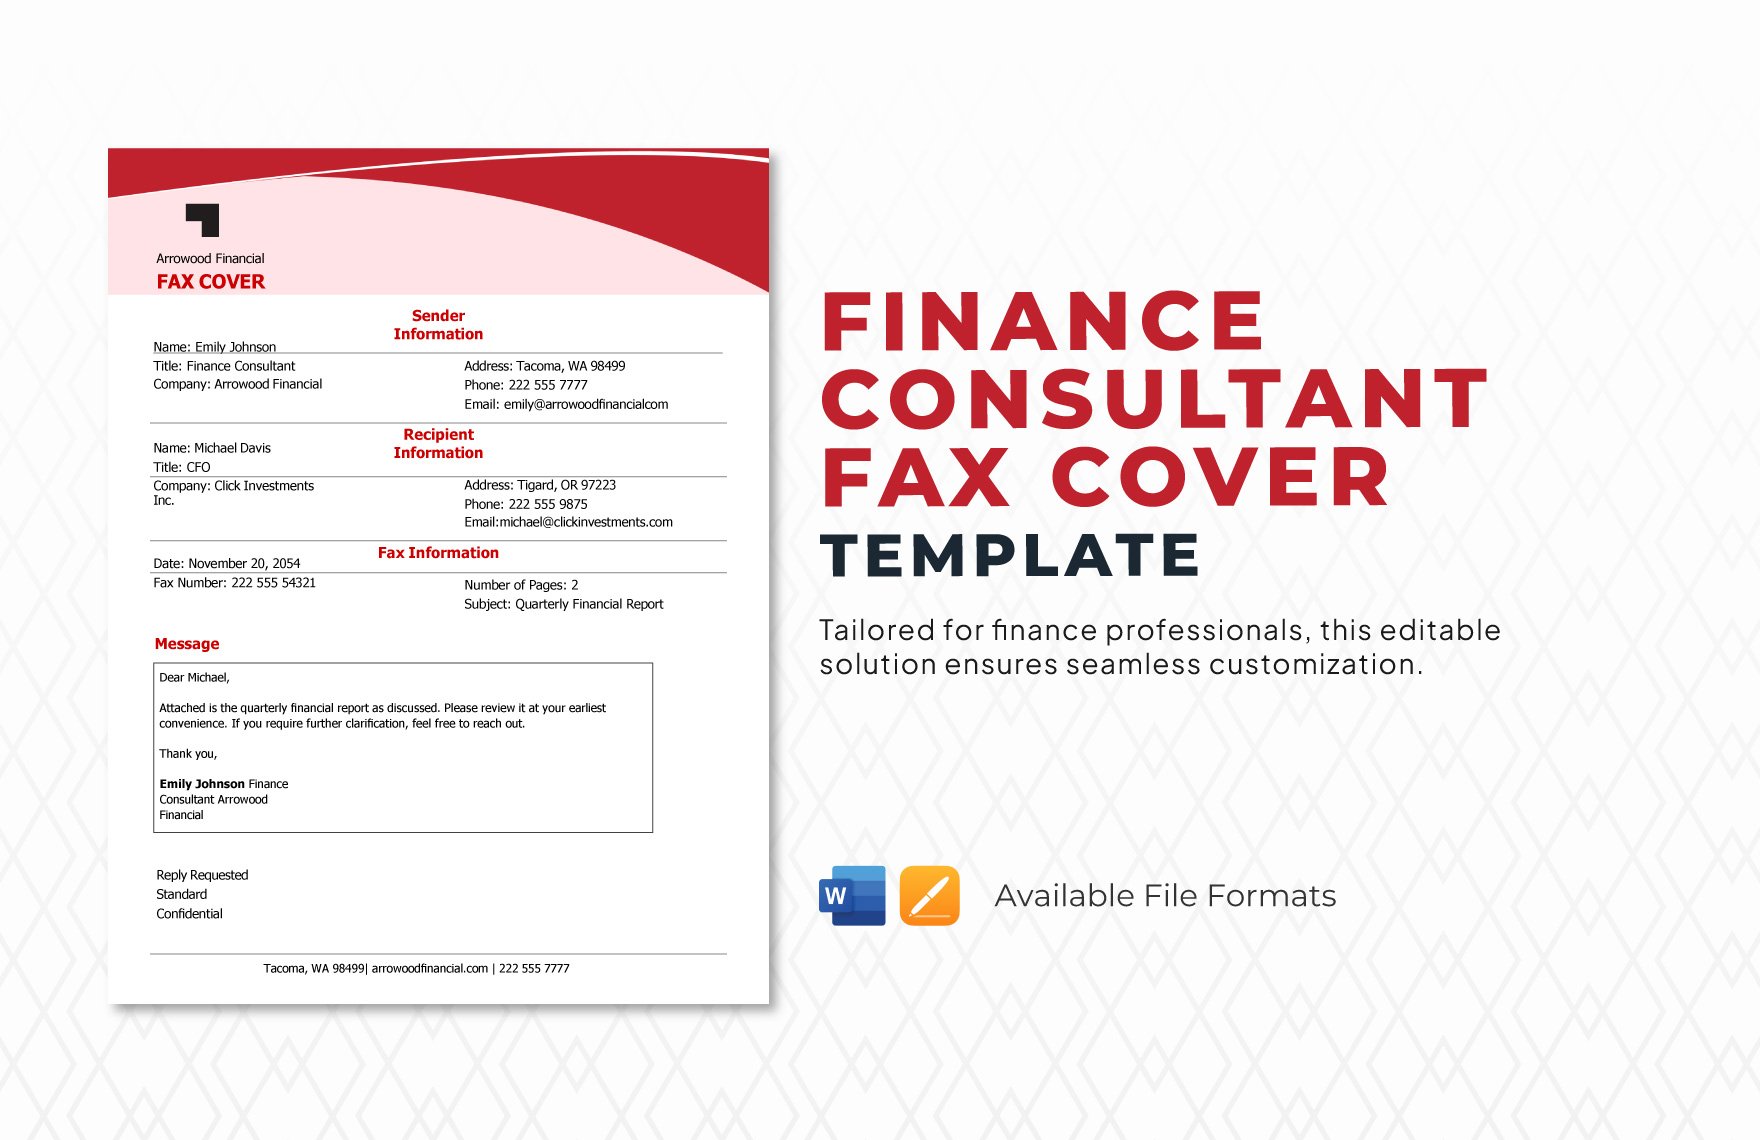 Finance Consultant Fax Cover Template in Word